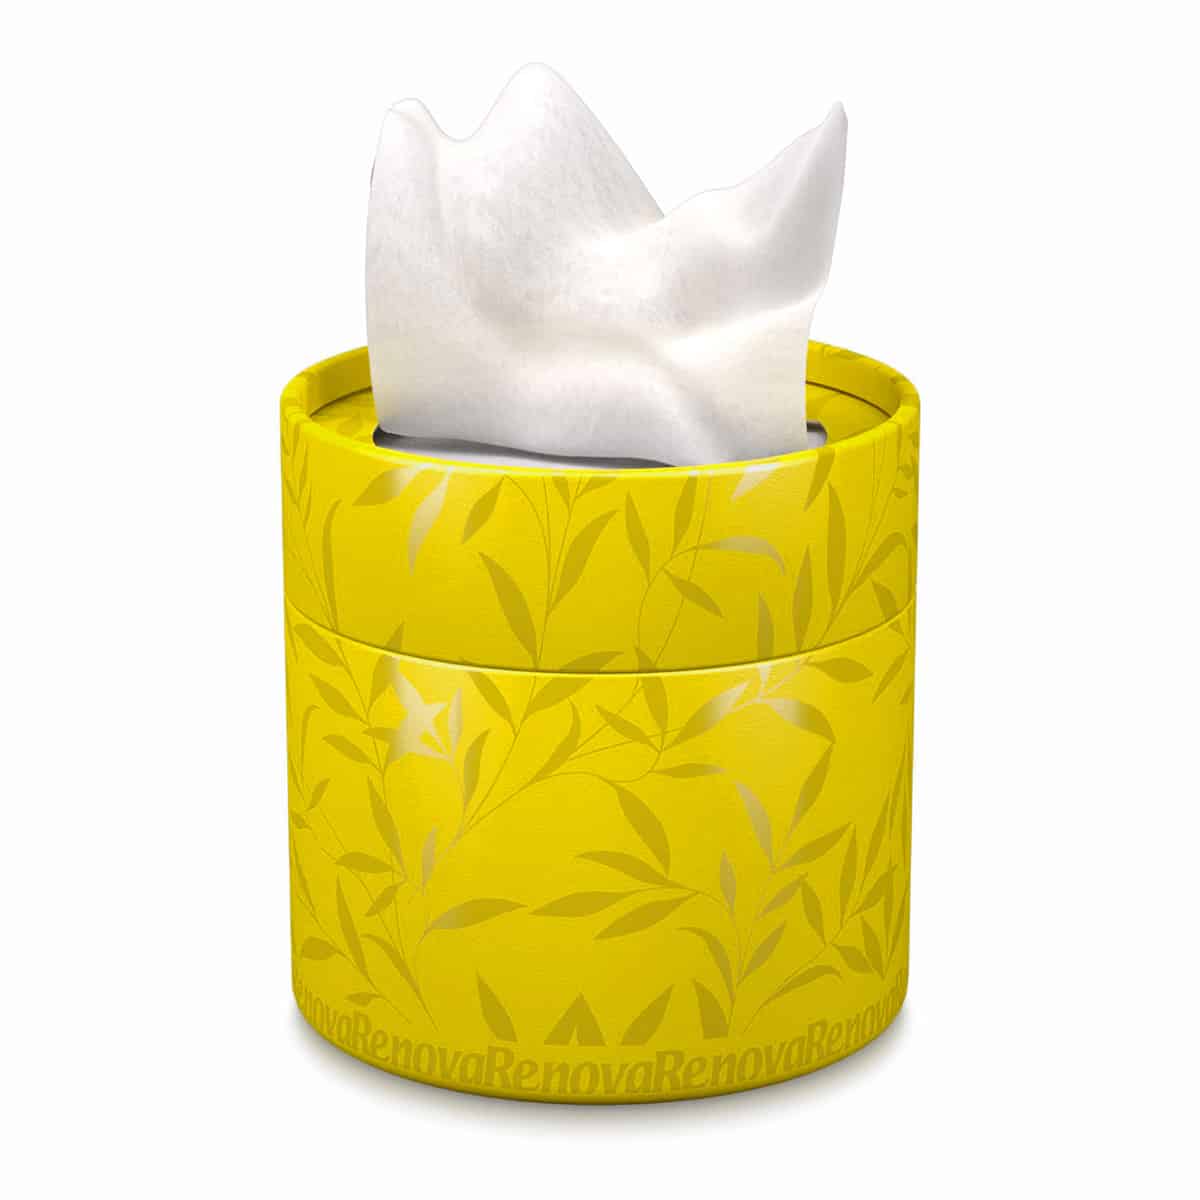 White Facial Tissue-Colored Round Box 3 Ply-40 Tissues 